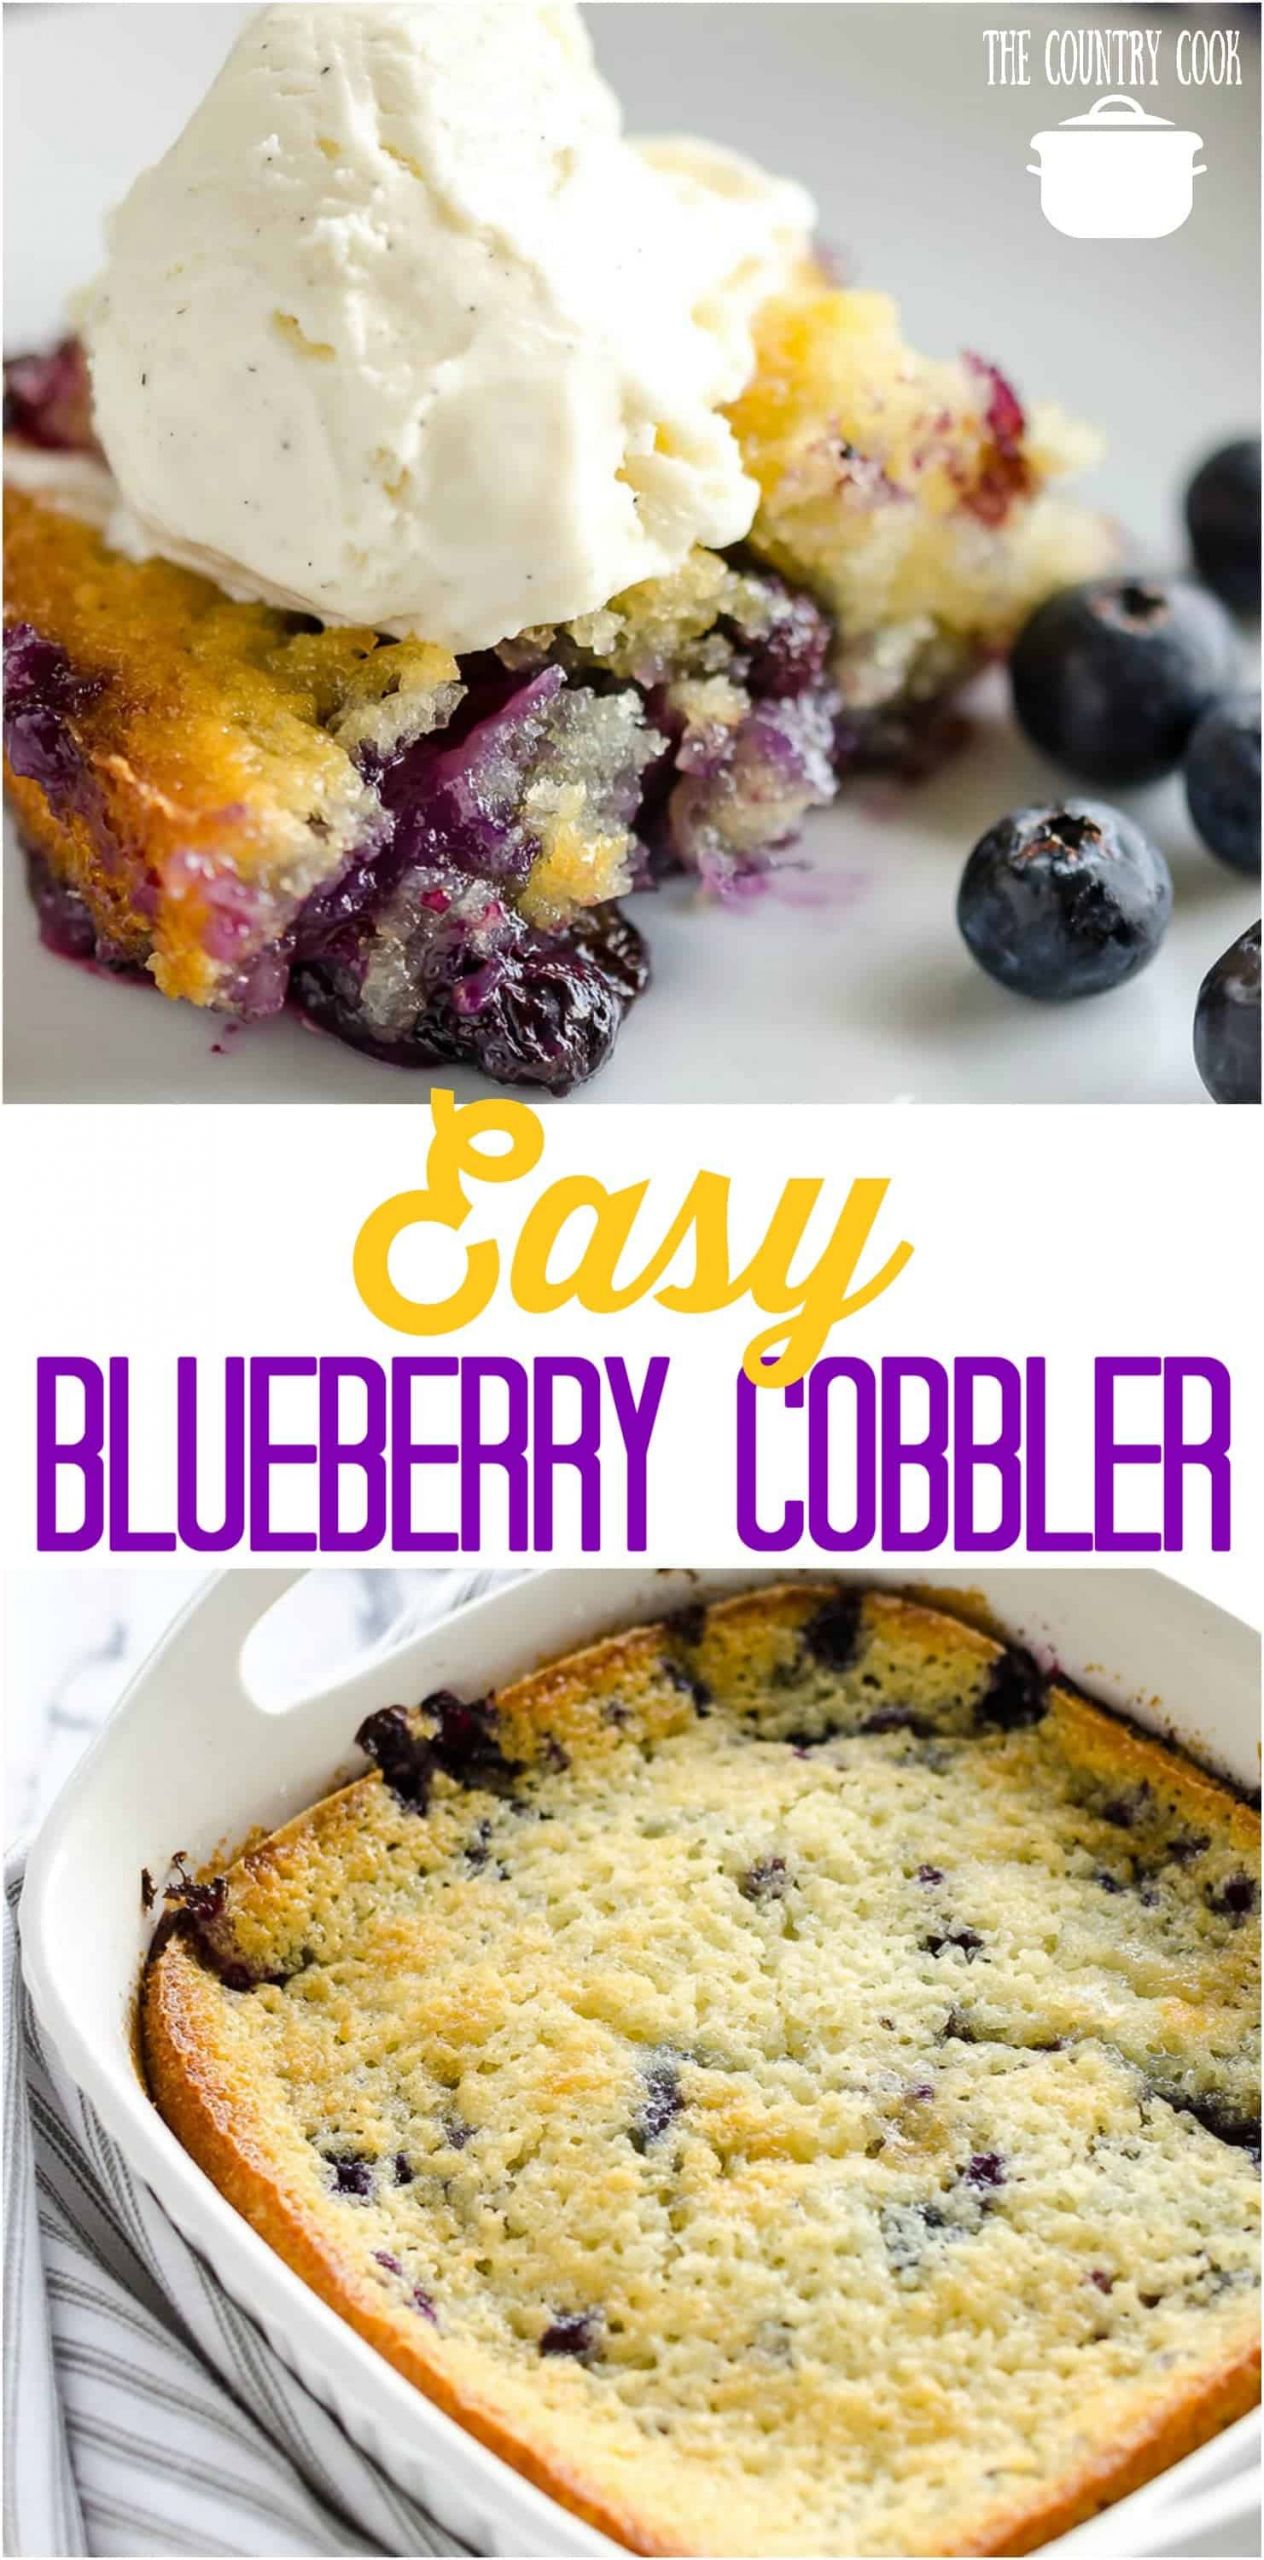 Best Blueberry Desserts
 Easy Blueberry Cobbler The Country Cook